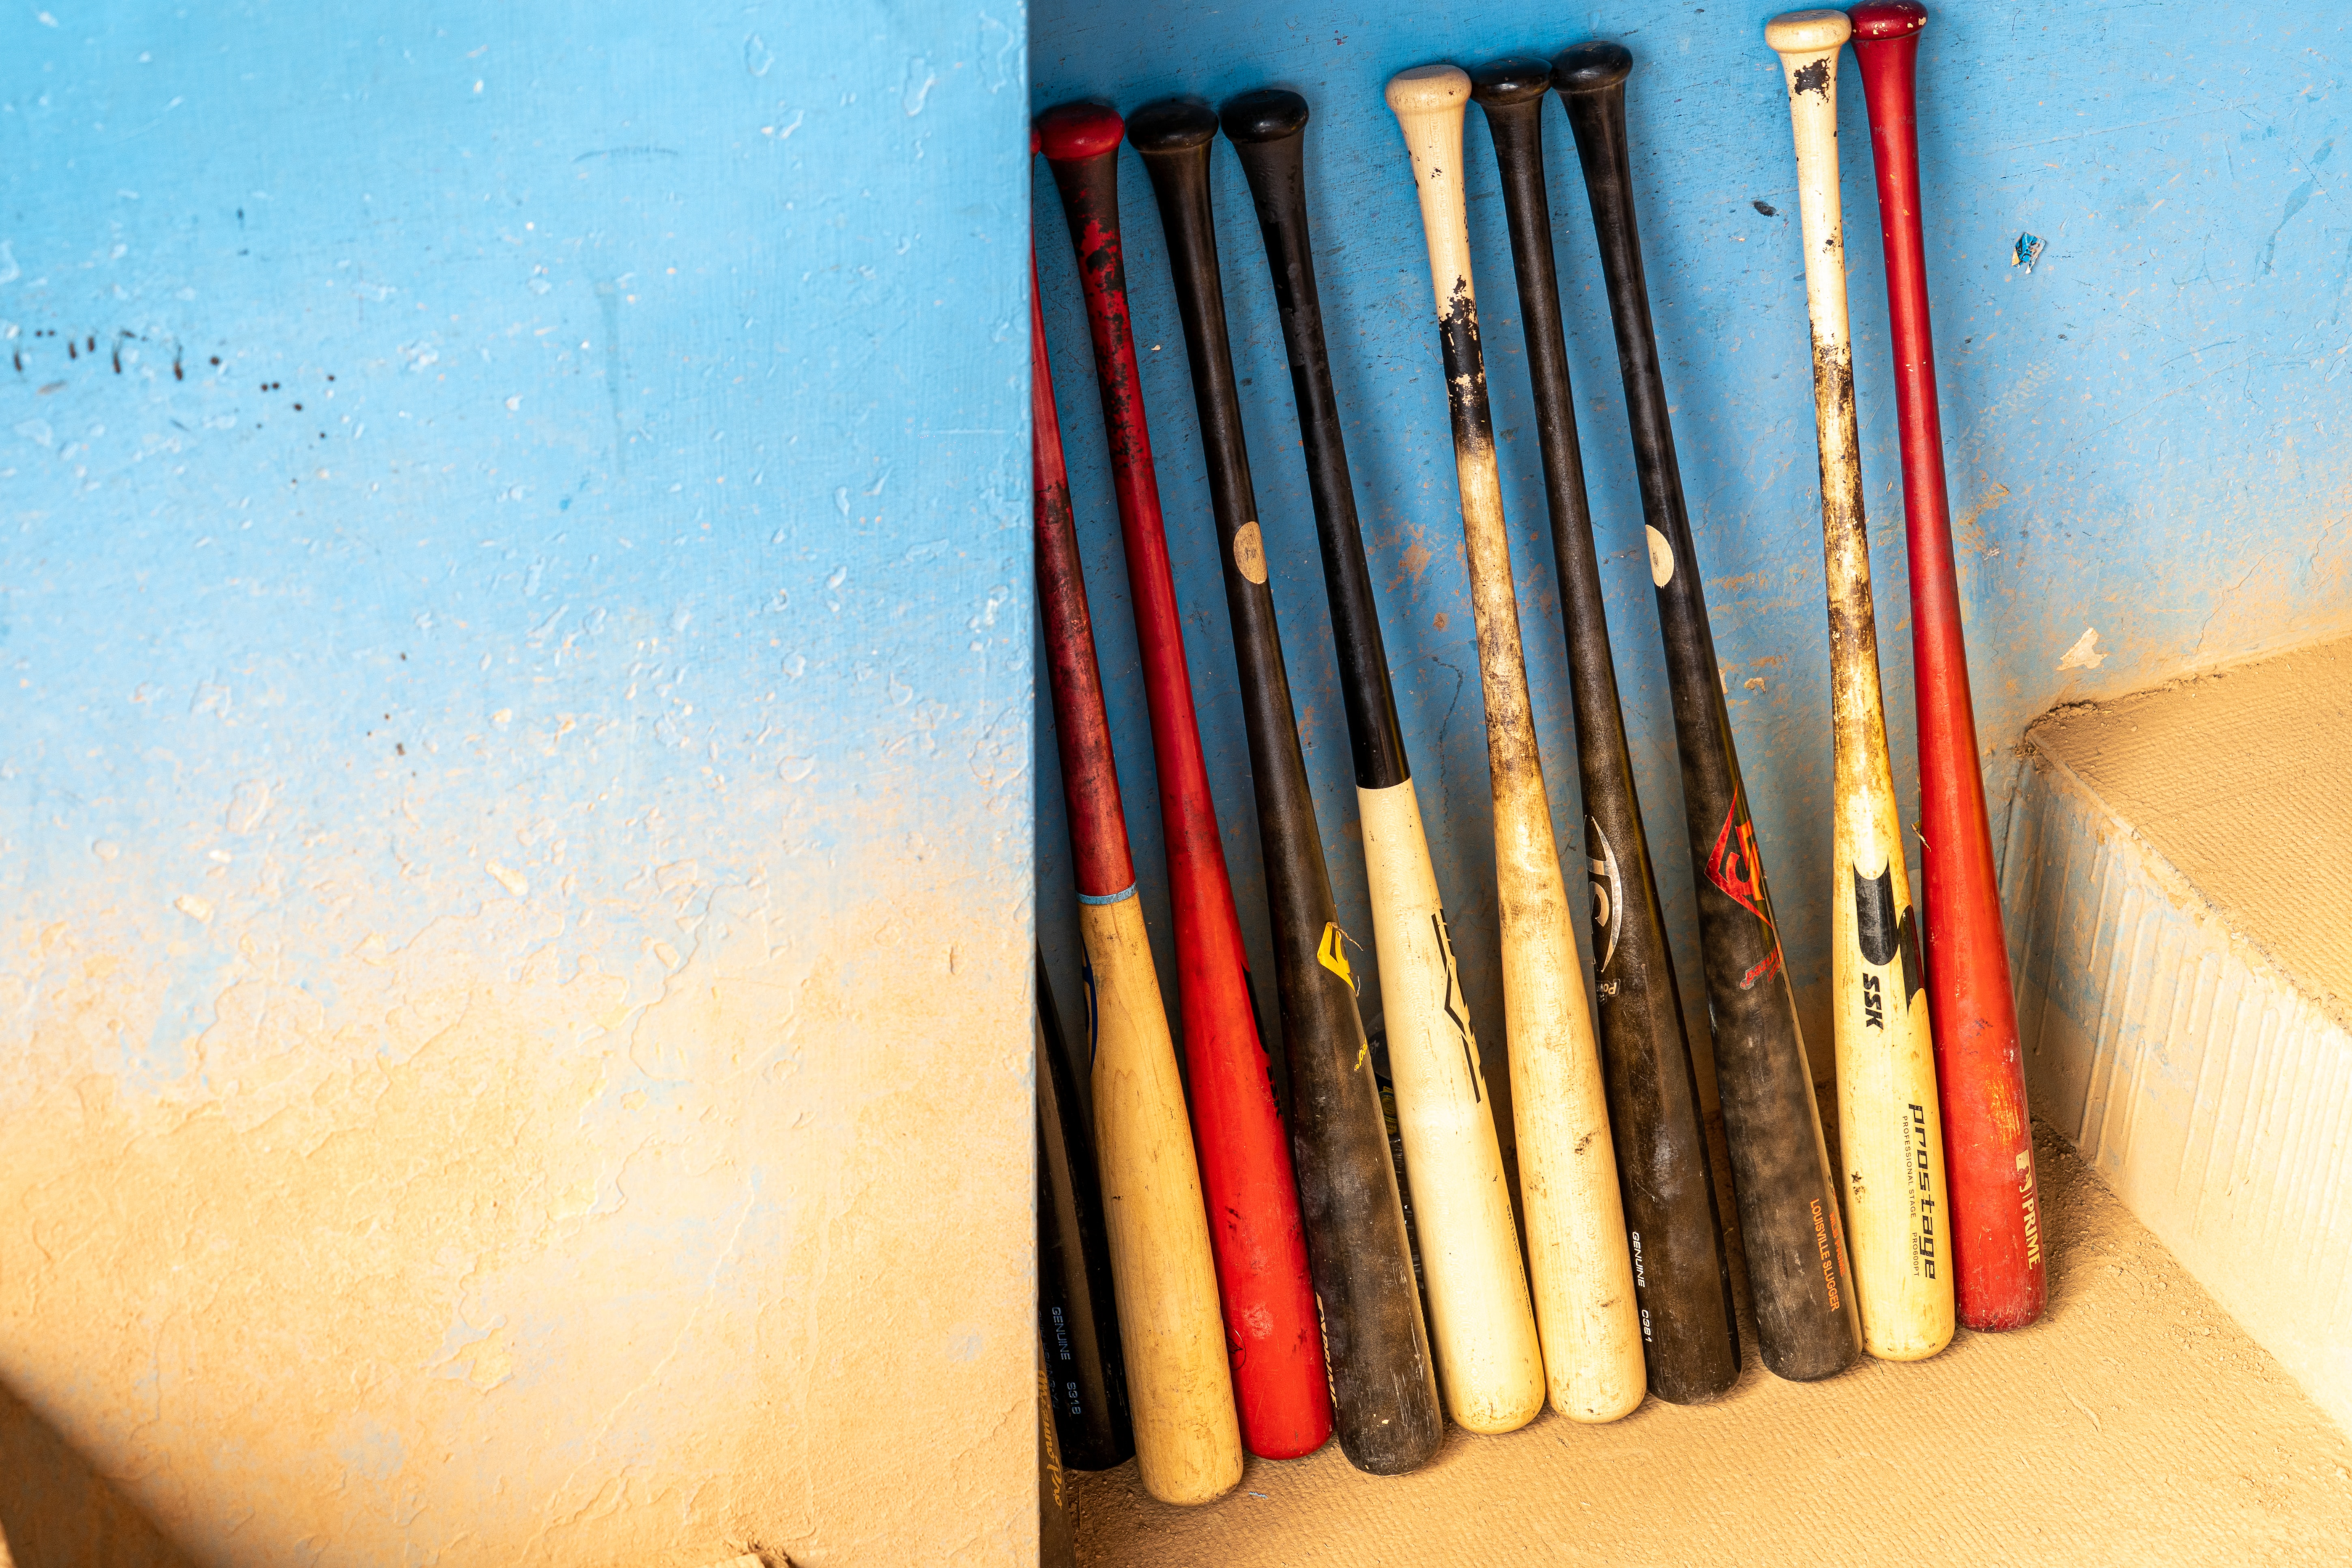 A set of wood baseball bats in a dugout on the wall.